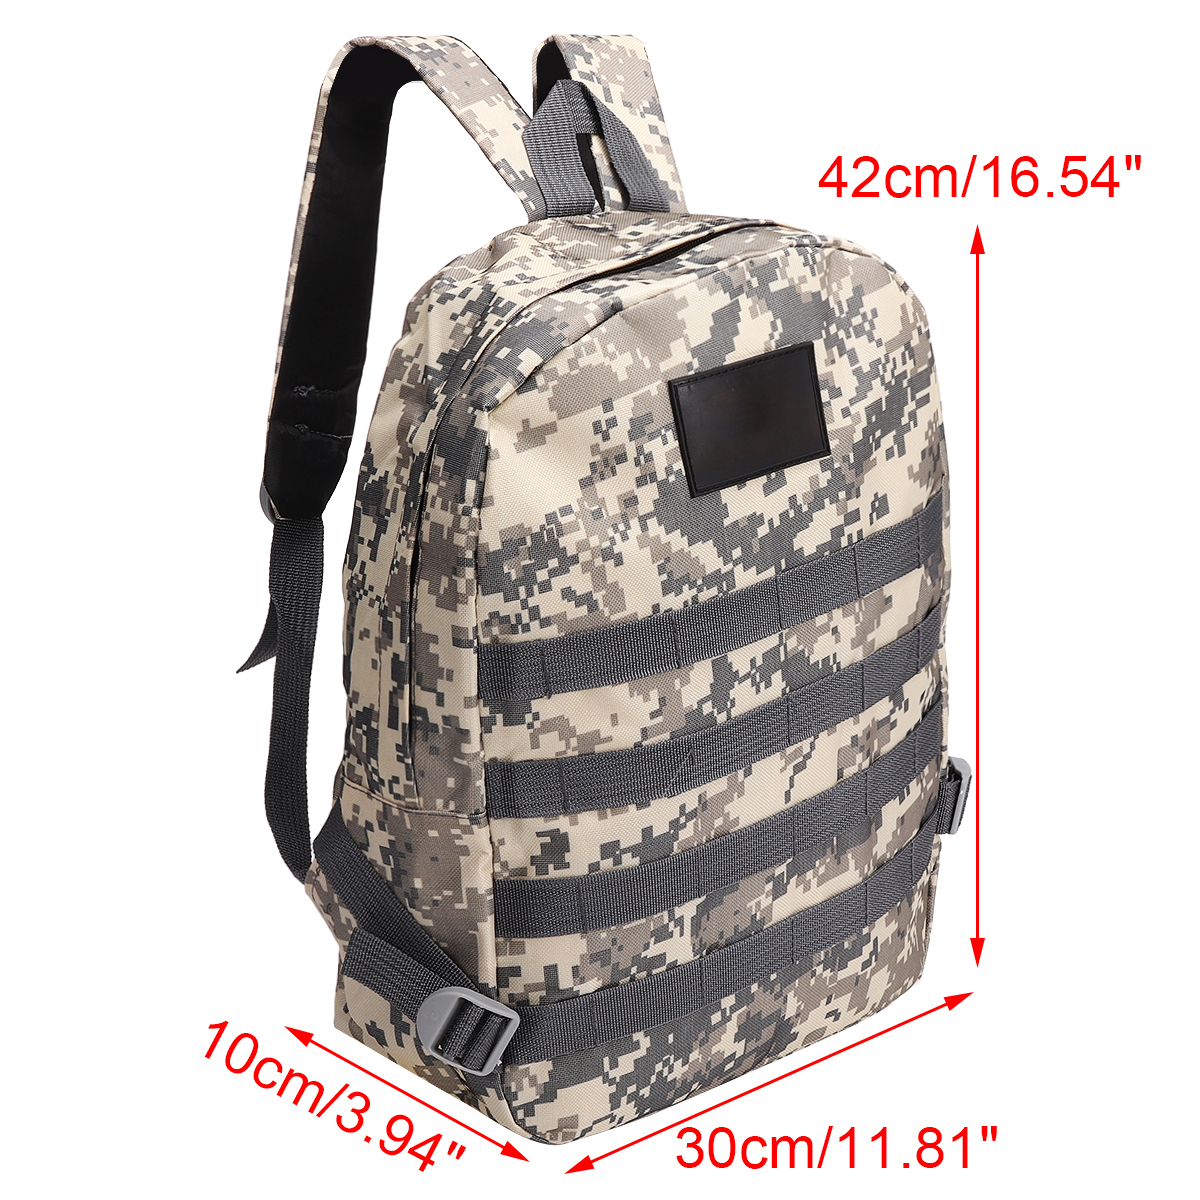 Camouflage-Large-Capacity-Oxford-Cloth-Macbook-Mobile-Phone-Storage-Bag-Backpack-1860030-10